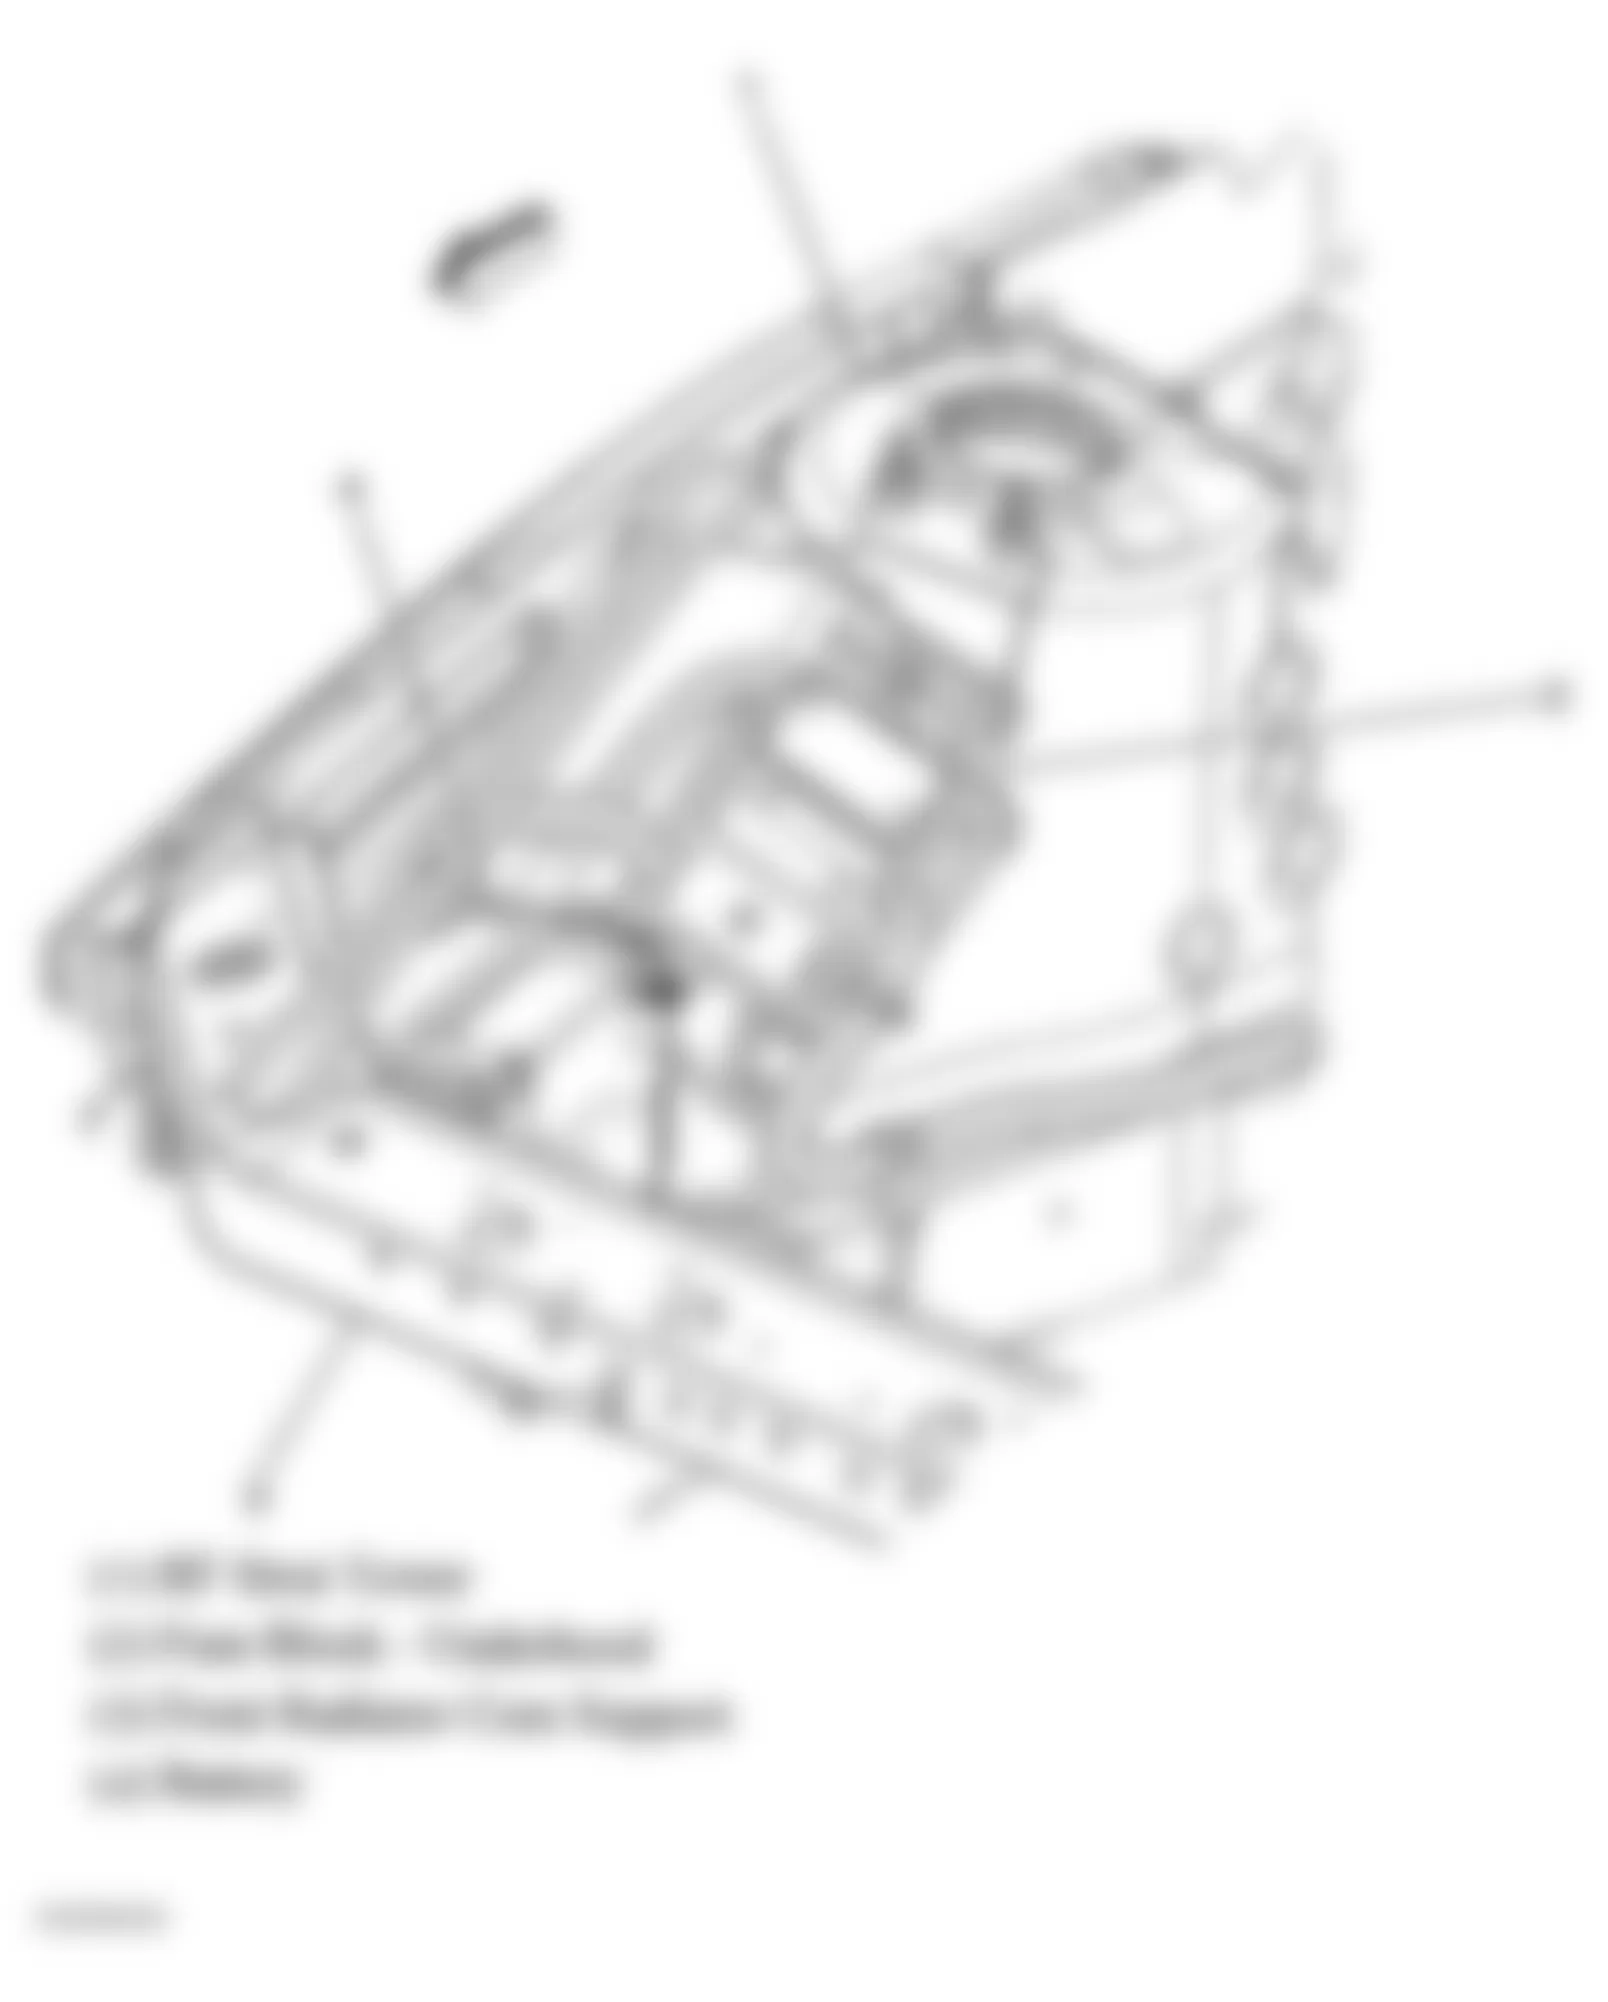 Buick LaCrosse CXL 2006 - Component Locations -  Right Front Of Engine Compartment